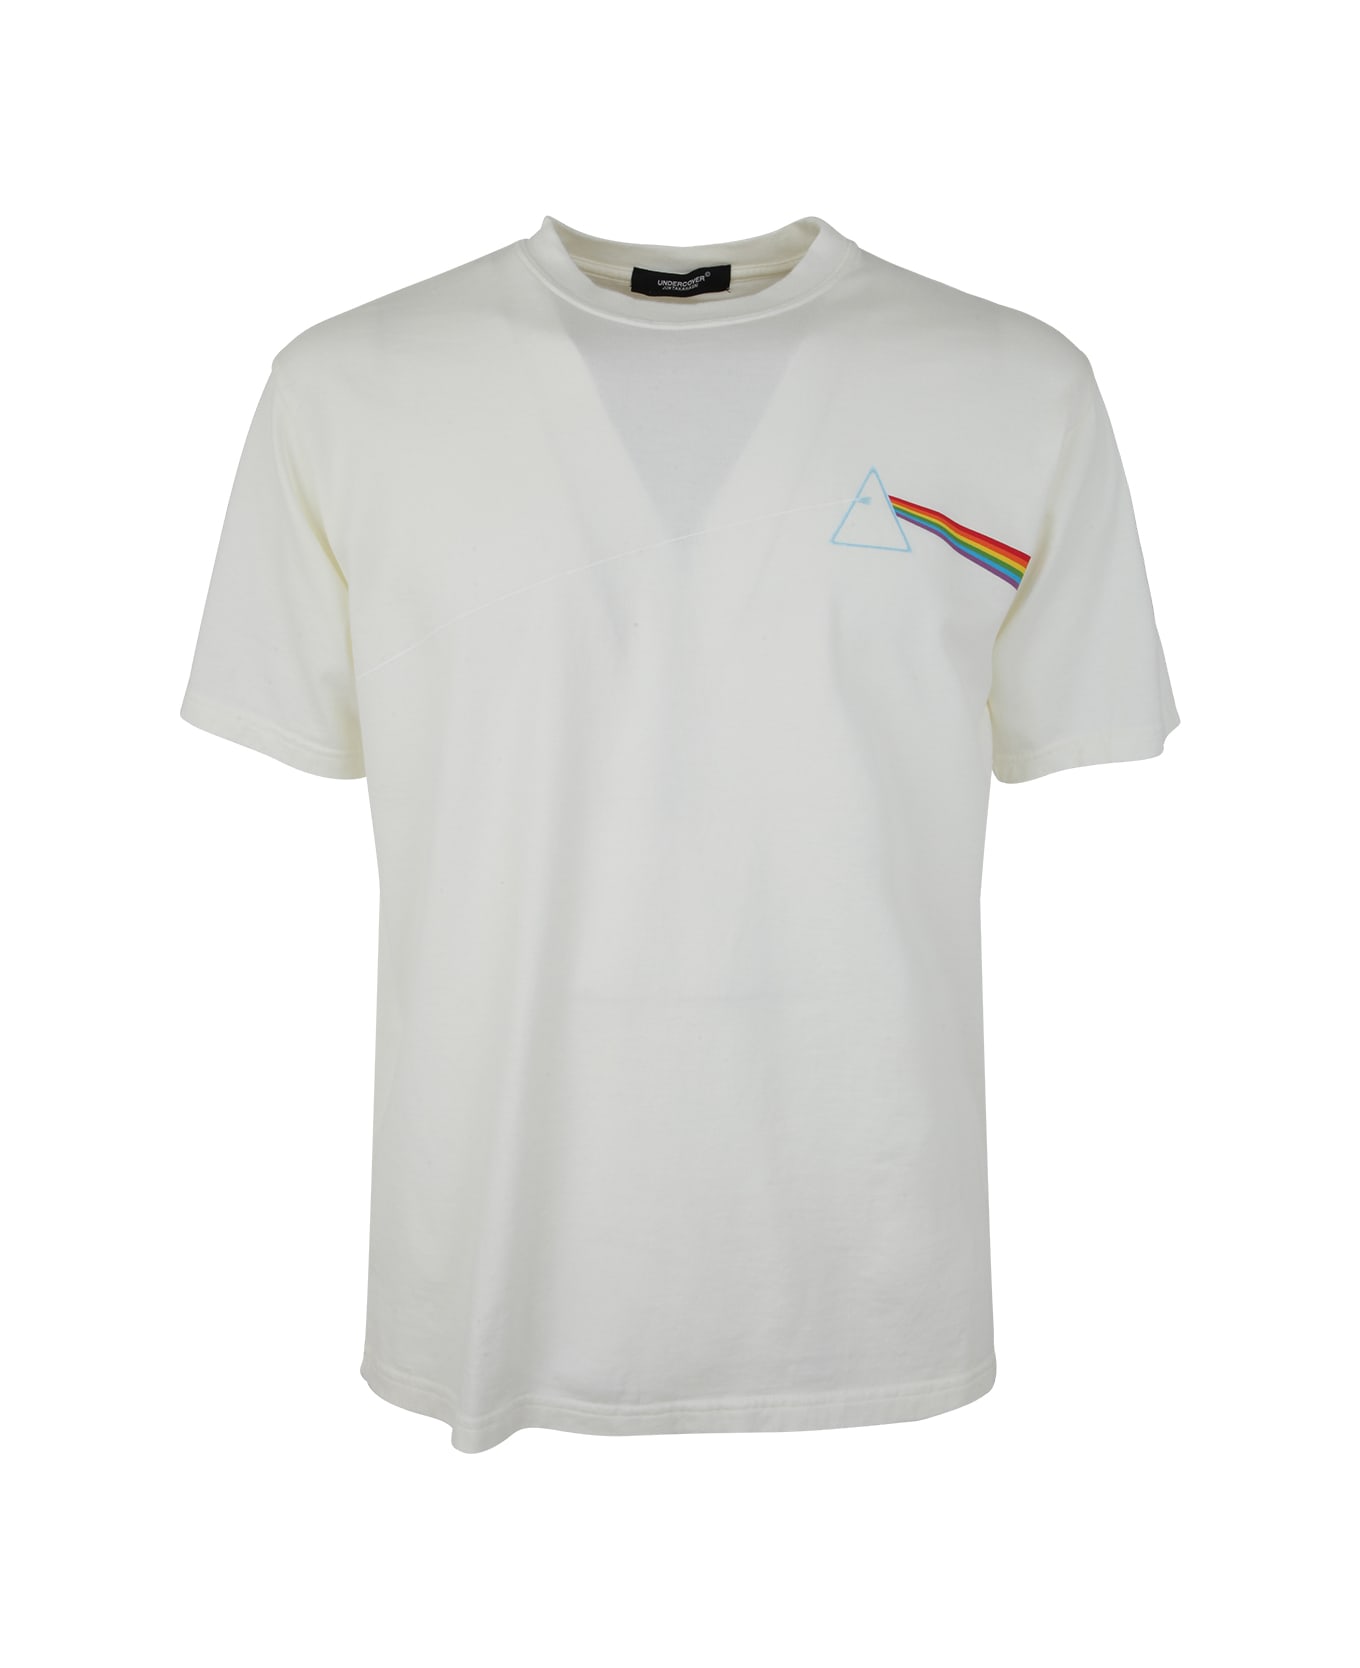 Undercover Jun Takahashi Loose Fit T-shirt - Ivory